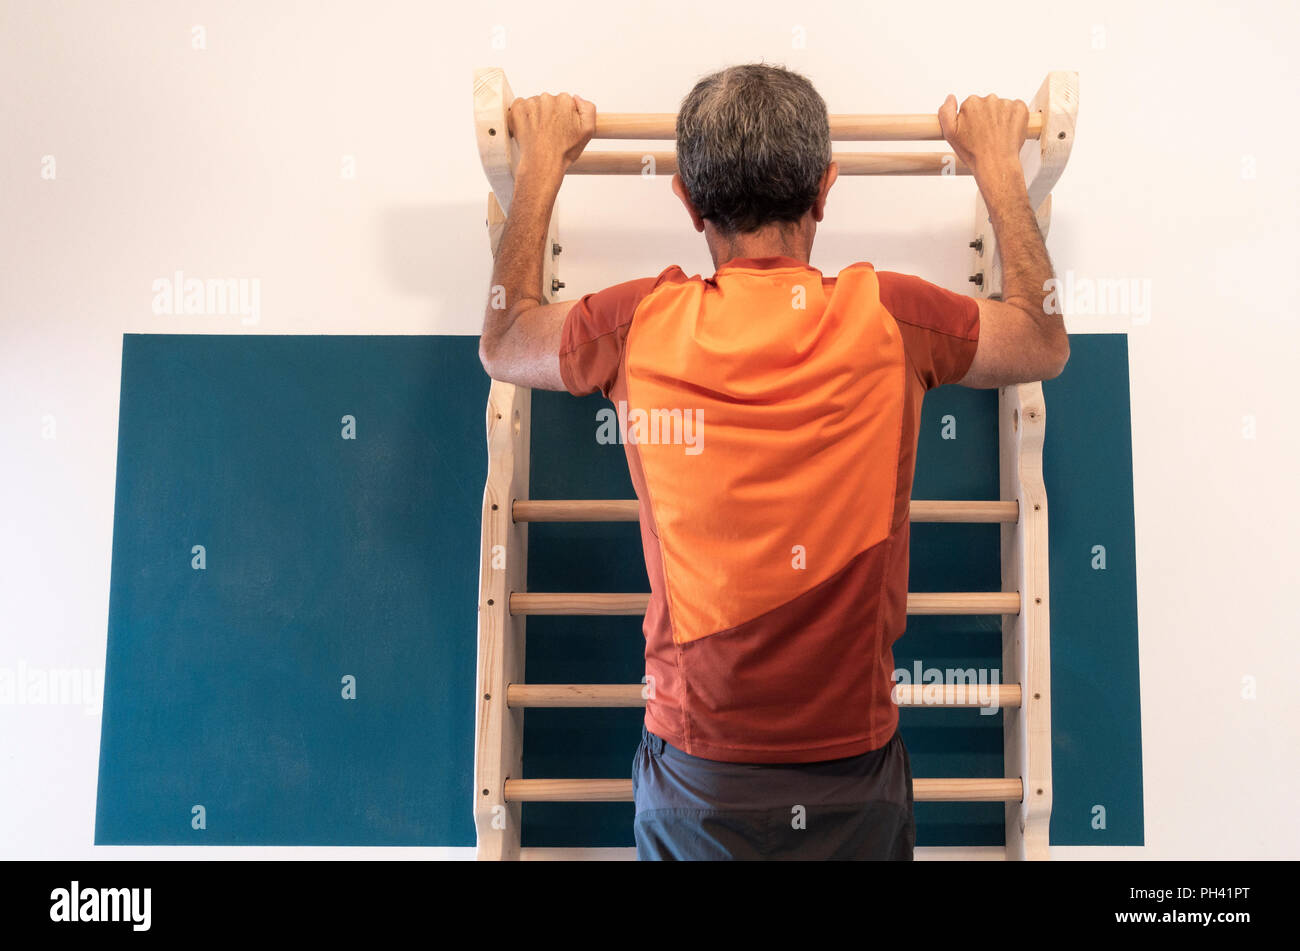 61 year old man exercising at home on homemade wall bars in small apartment. Stock Photo